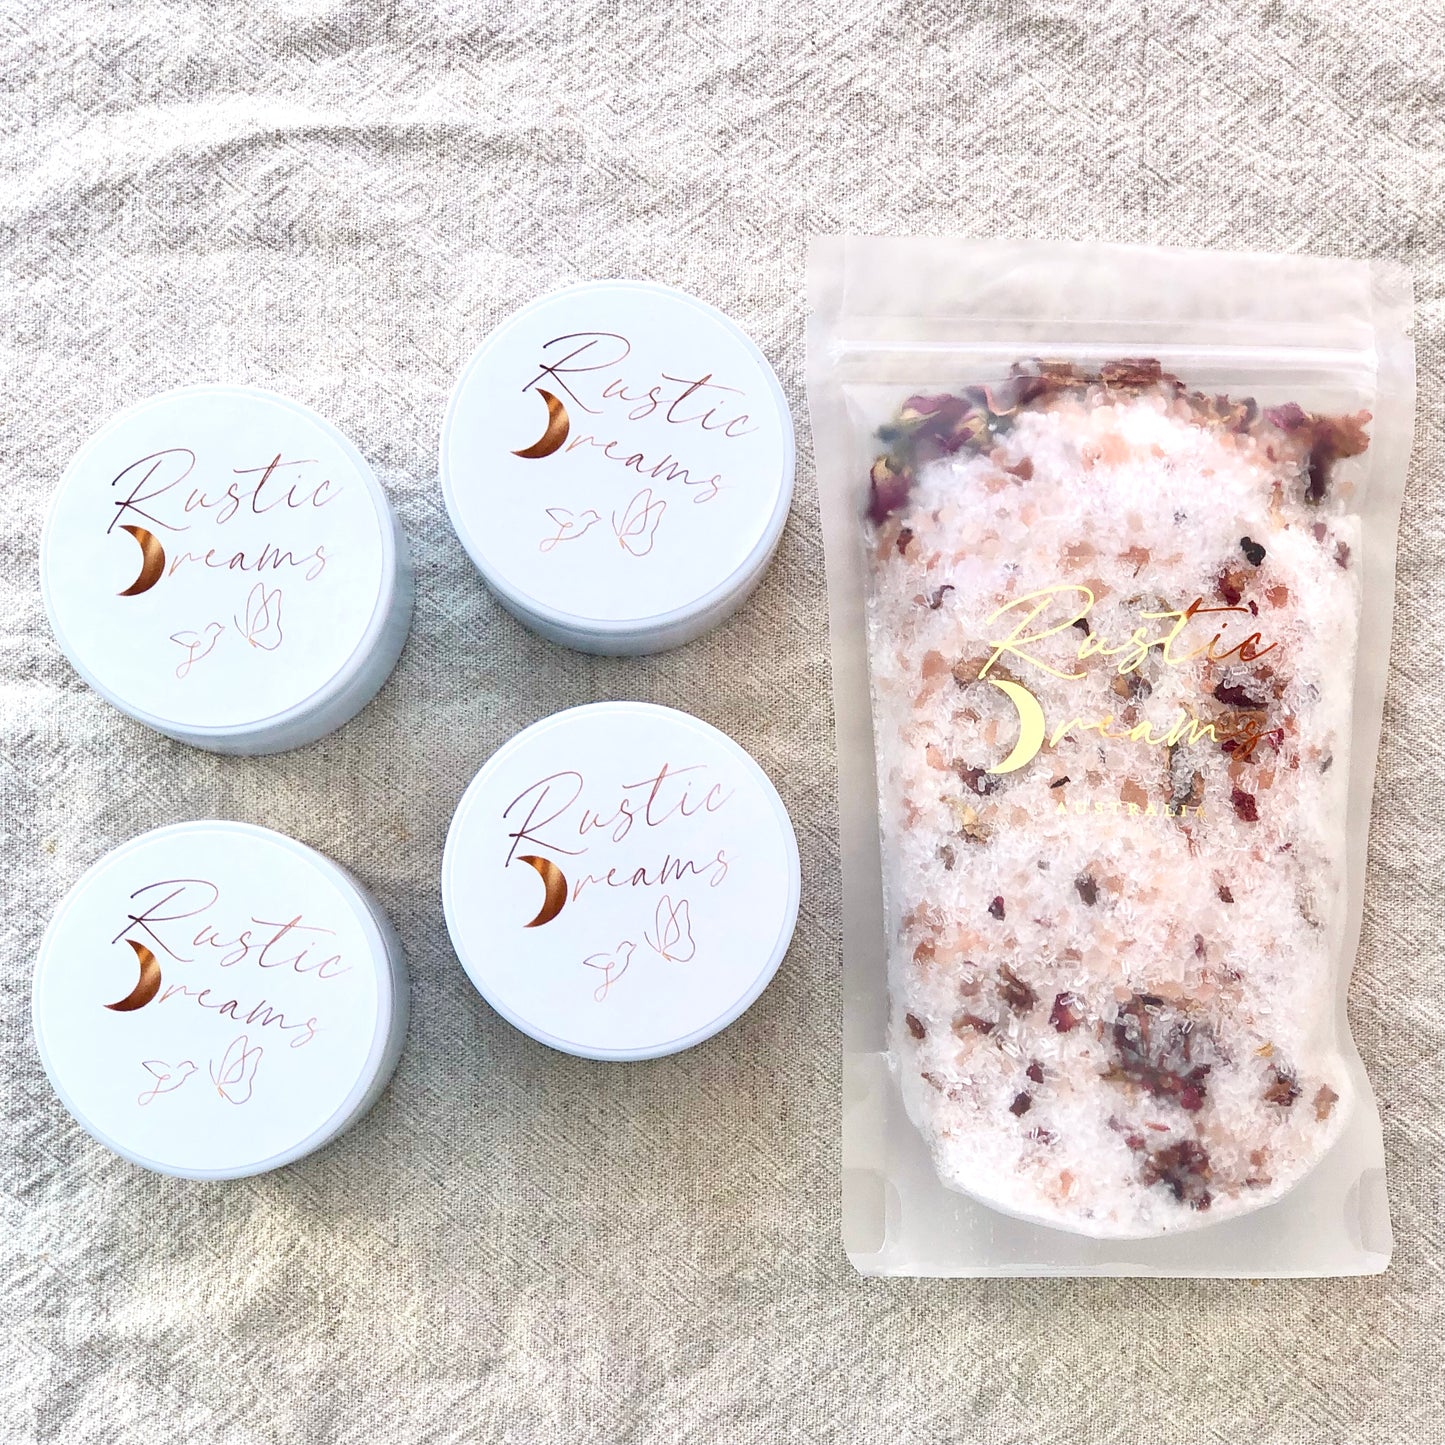 Thank-You Gift Box - Scented Soy Candles - Essential Oils - Bath Salts